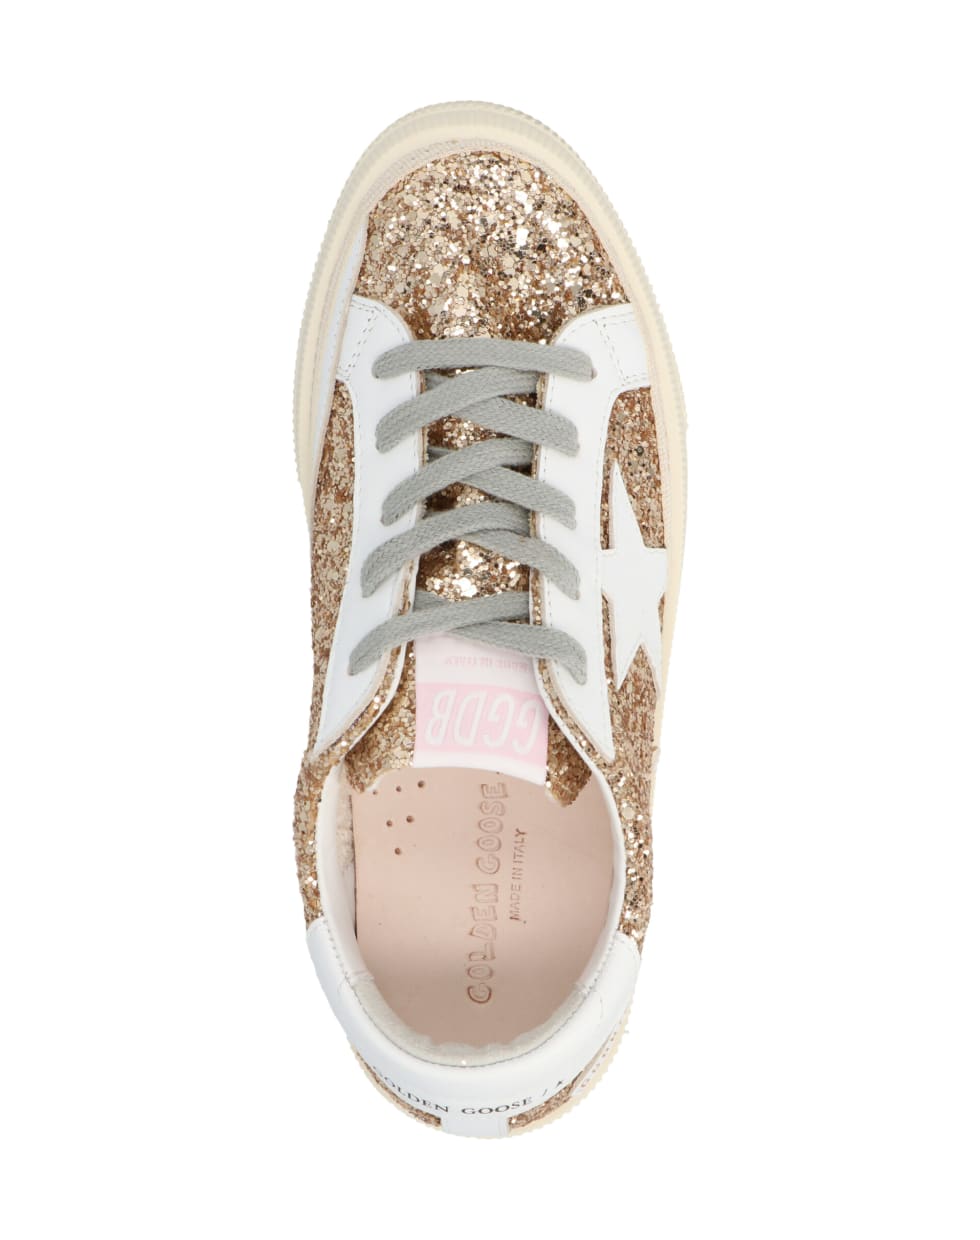 Golden Goose 'may' Shoes - Multicolor